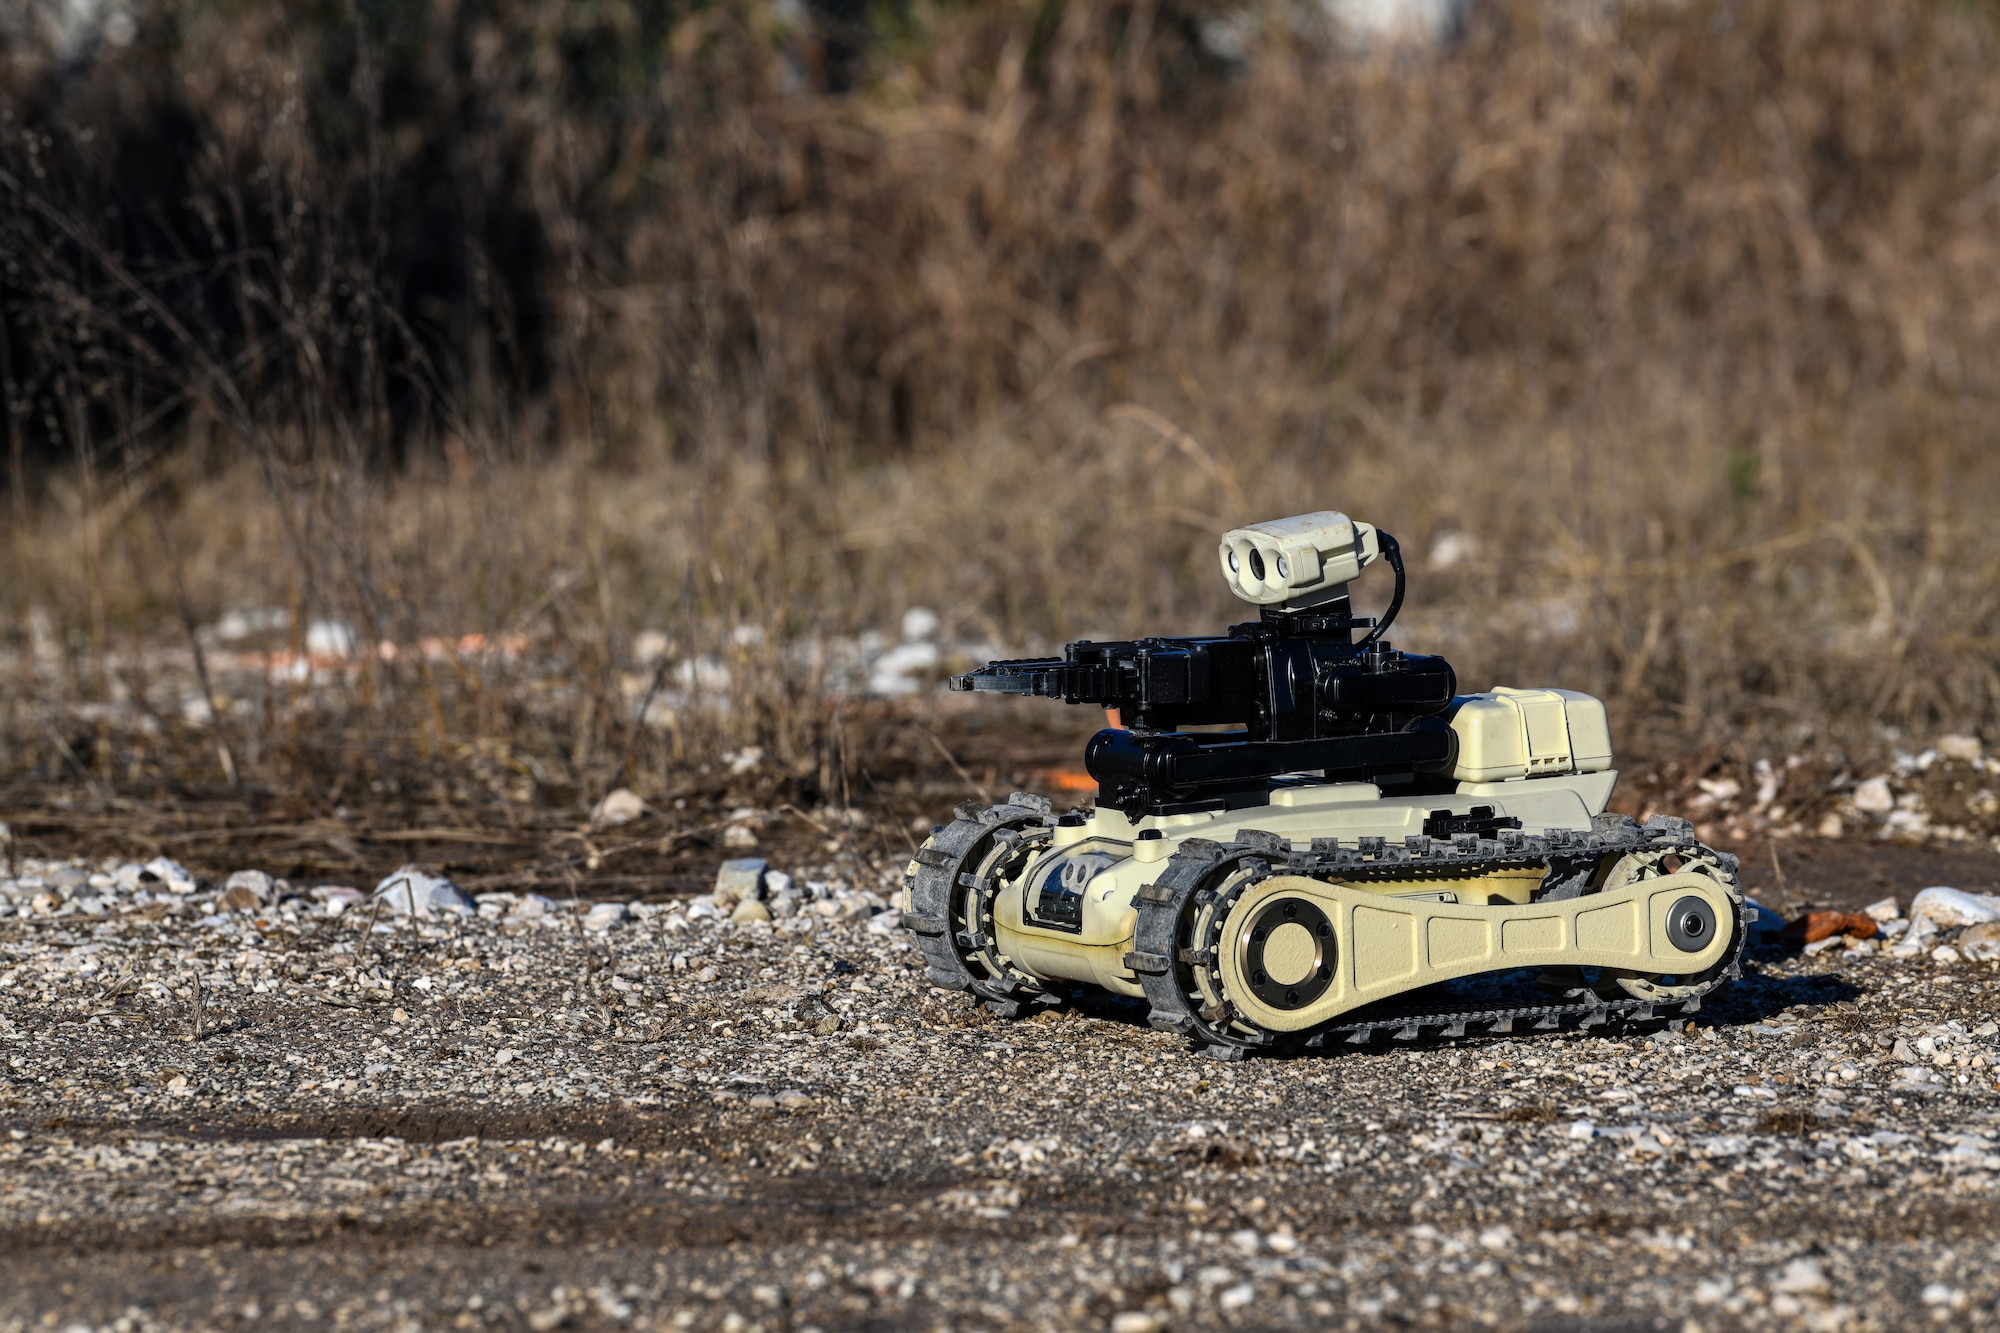 A Micro Tactical Ground Robot is used during a training exercise at Aviano Air Base, Italy, Jan. 8, 2020. The MTGR is a lightweight, tactical vehicle with high maneuverability that can be used in all terrains and both indoors and outdoors. It is also a handheld system that can be carried by an individual soldier. (U.S. Air Force photo by Airman 1st Class Ericka A. Woolever).